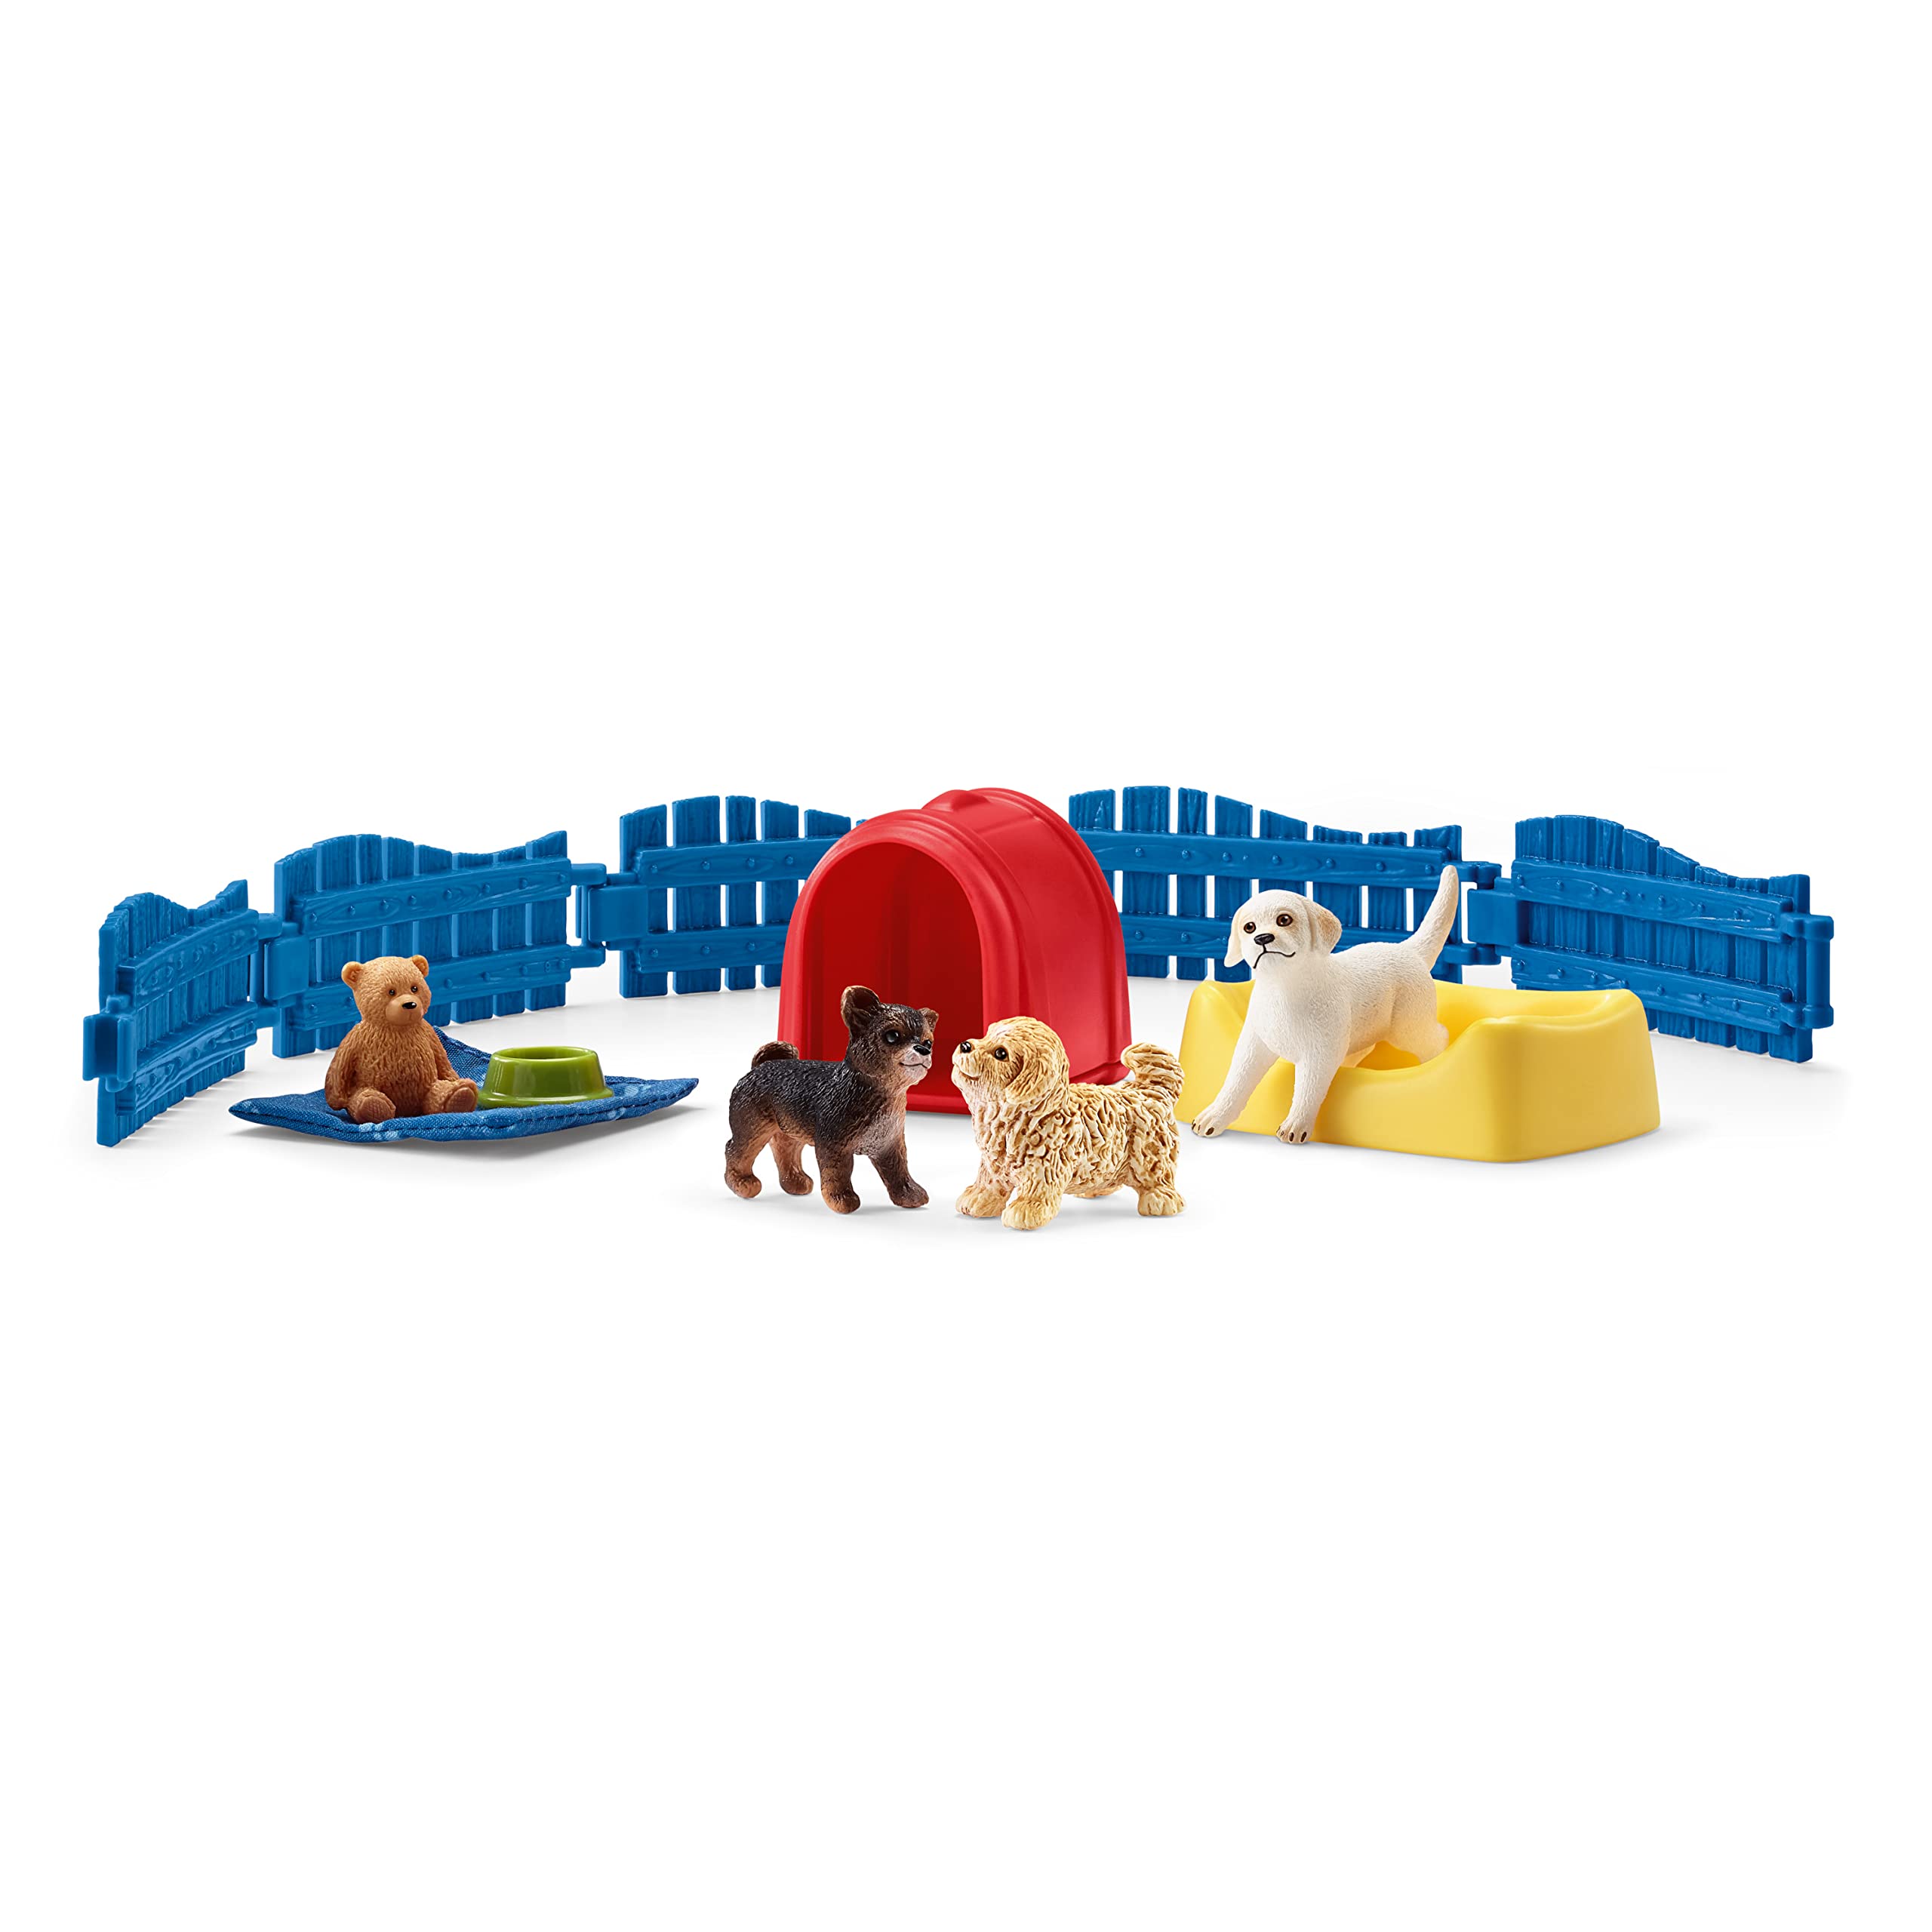 Schleich Farm World, Animal Toys for Boys and Girls Ages 3-8, 13-Piece Playset, Puppy Pen